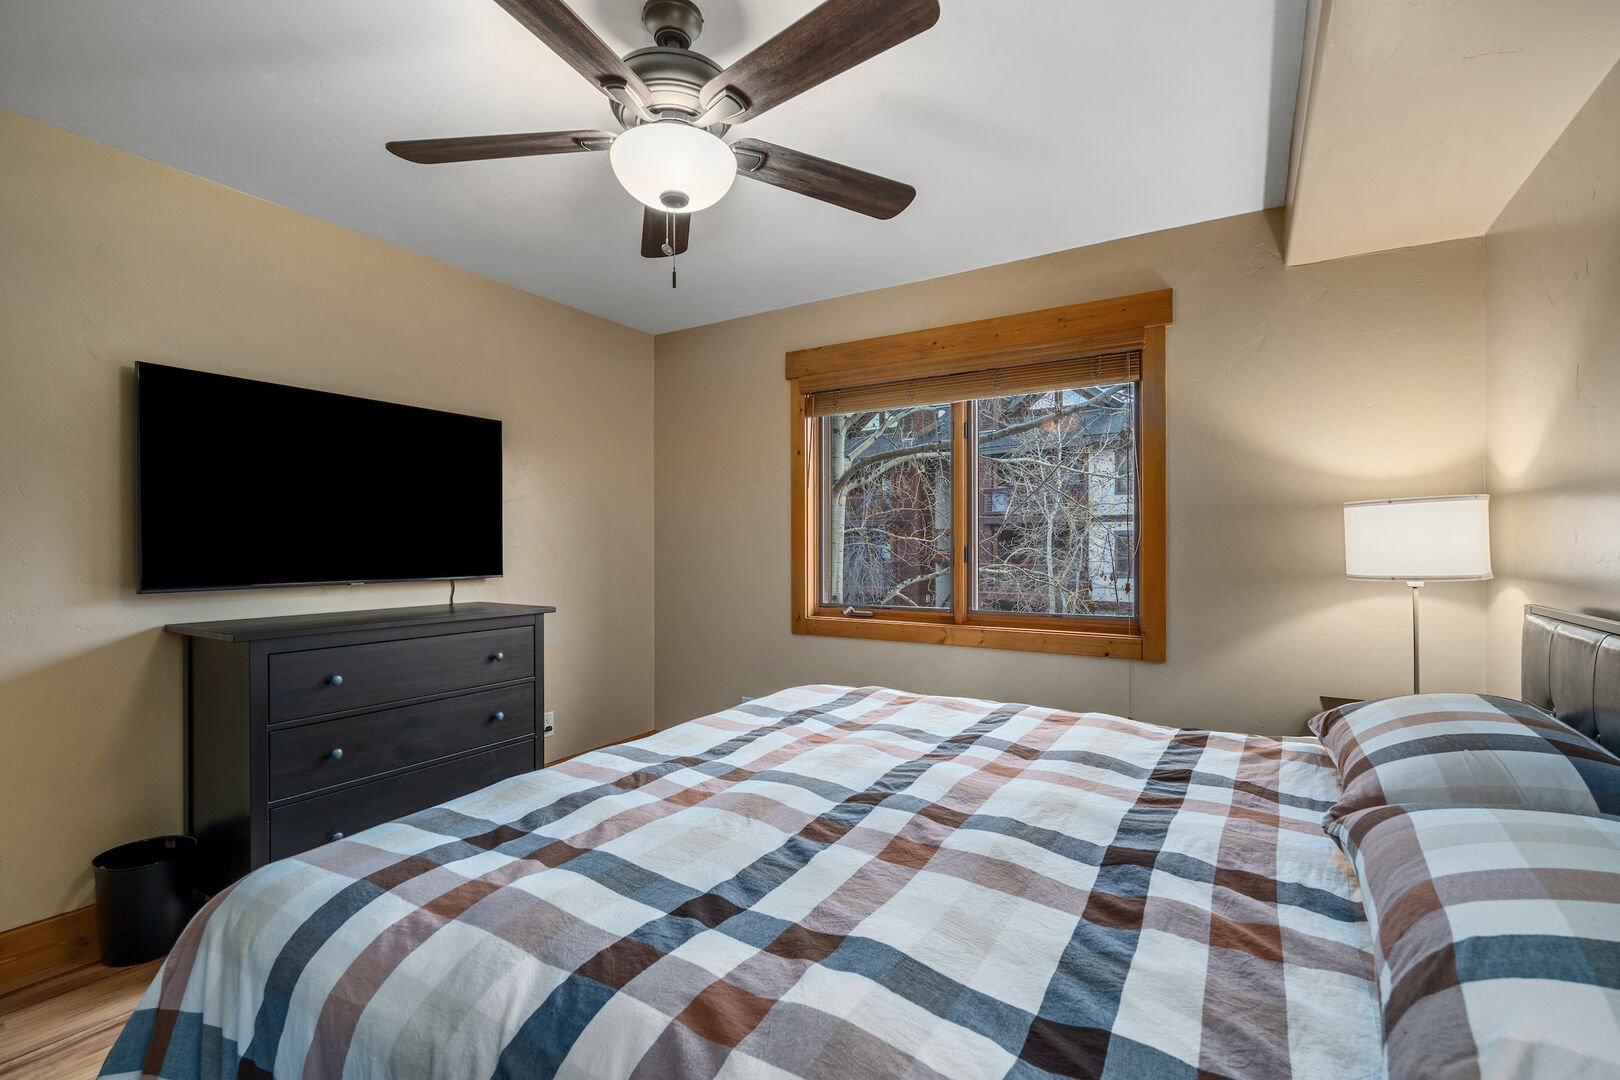 TV and ceiling fan are added comforts to the bedroom